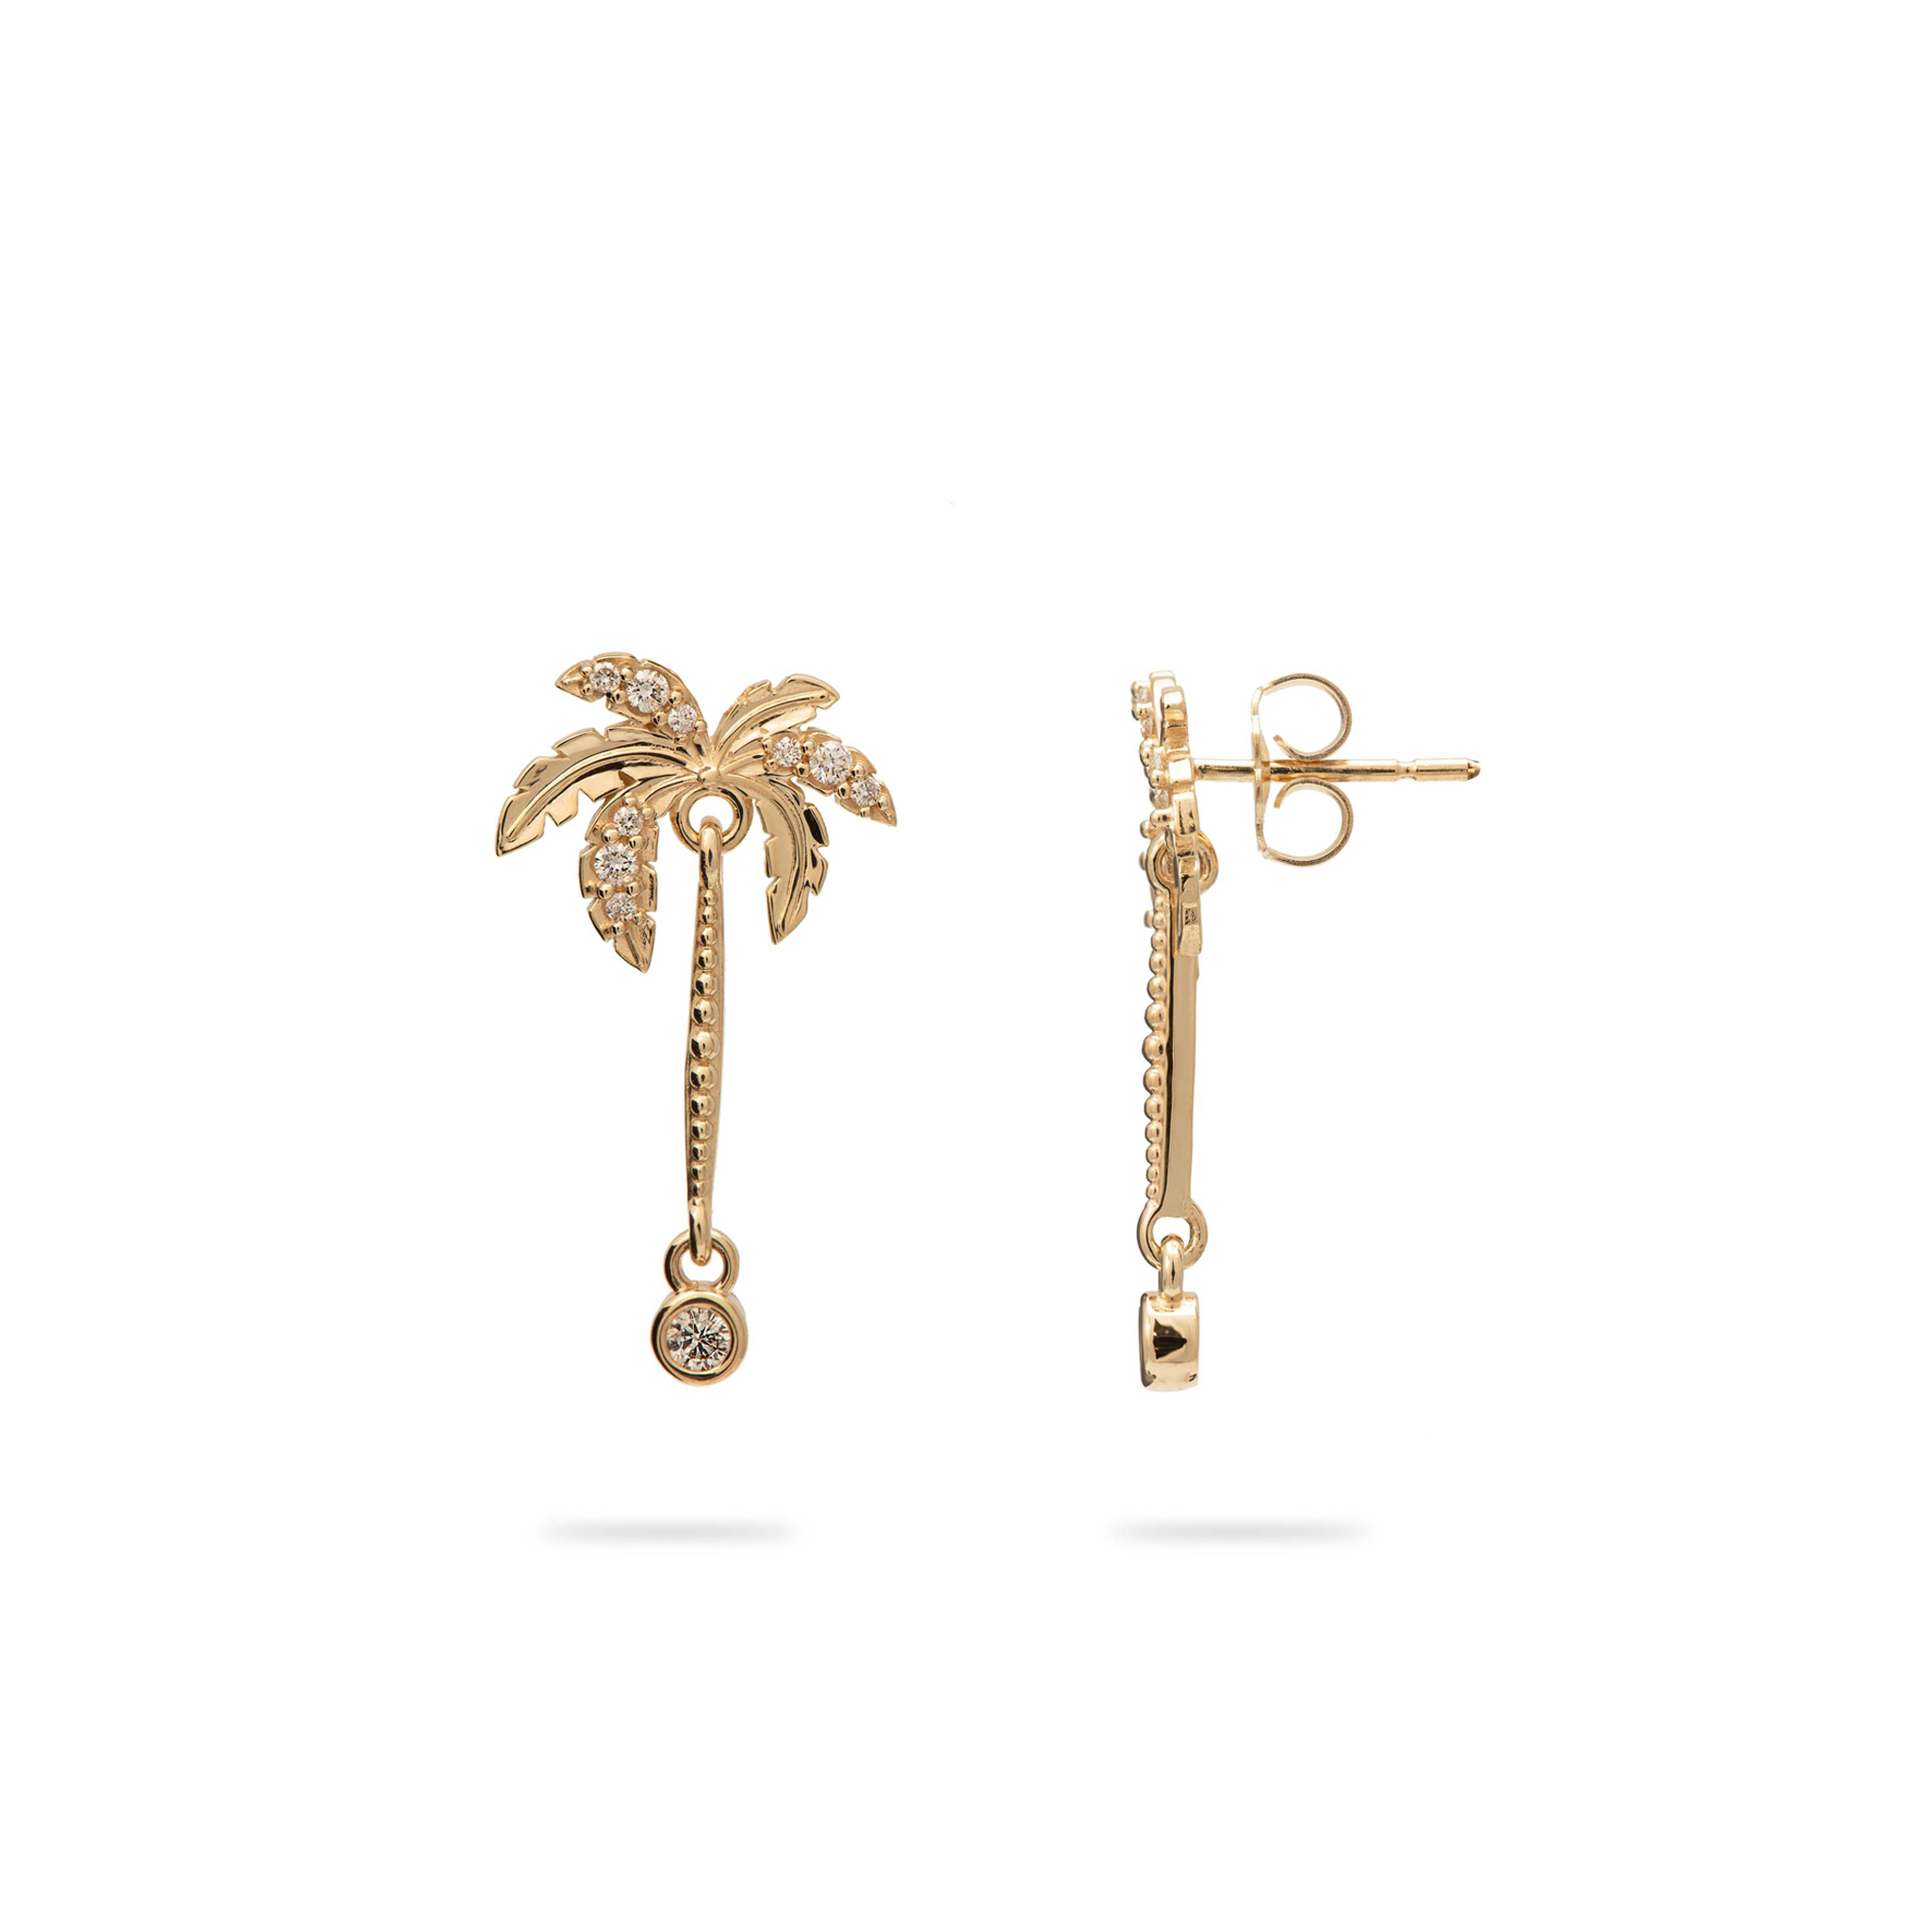 Paradise Palms - Palm Tree Earrings in Gold with Diamonds - 24mm